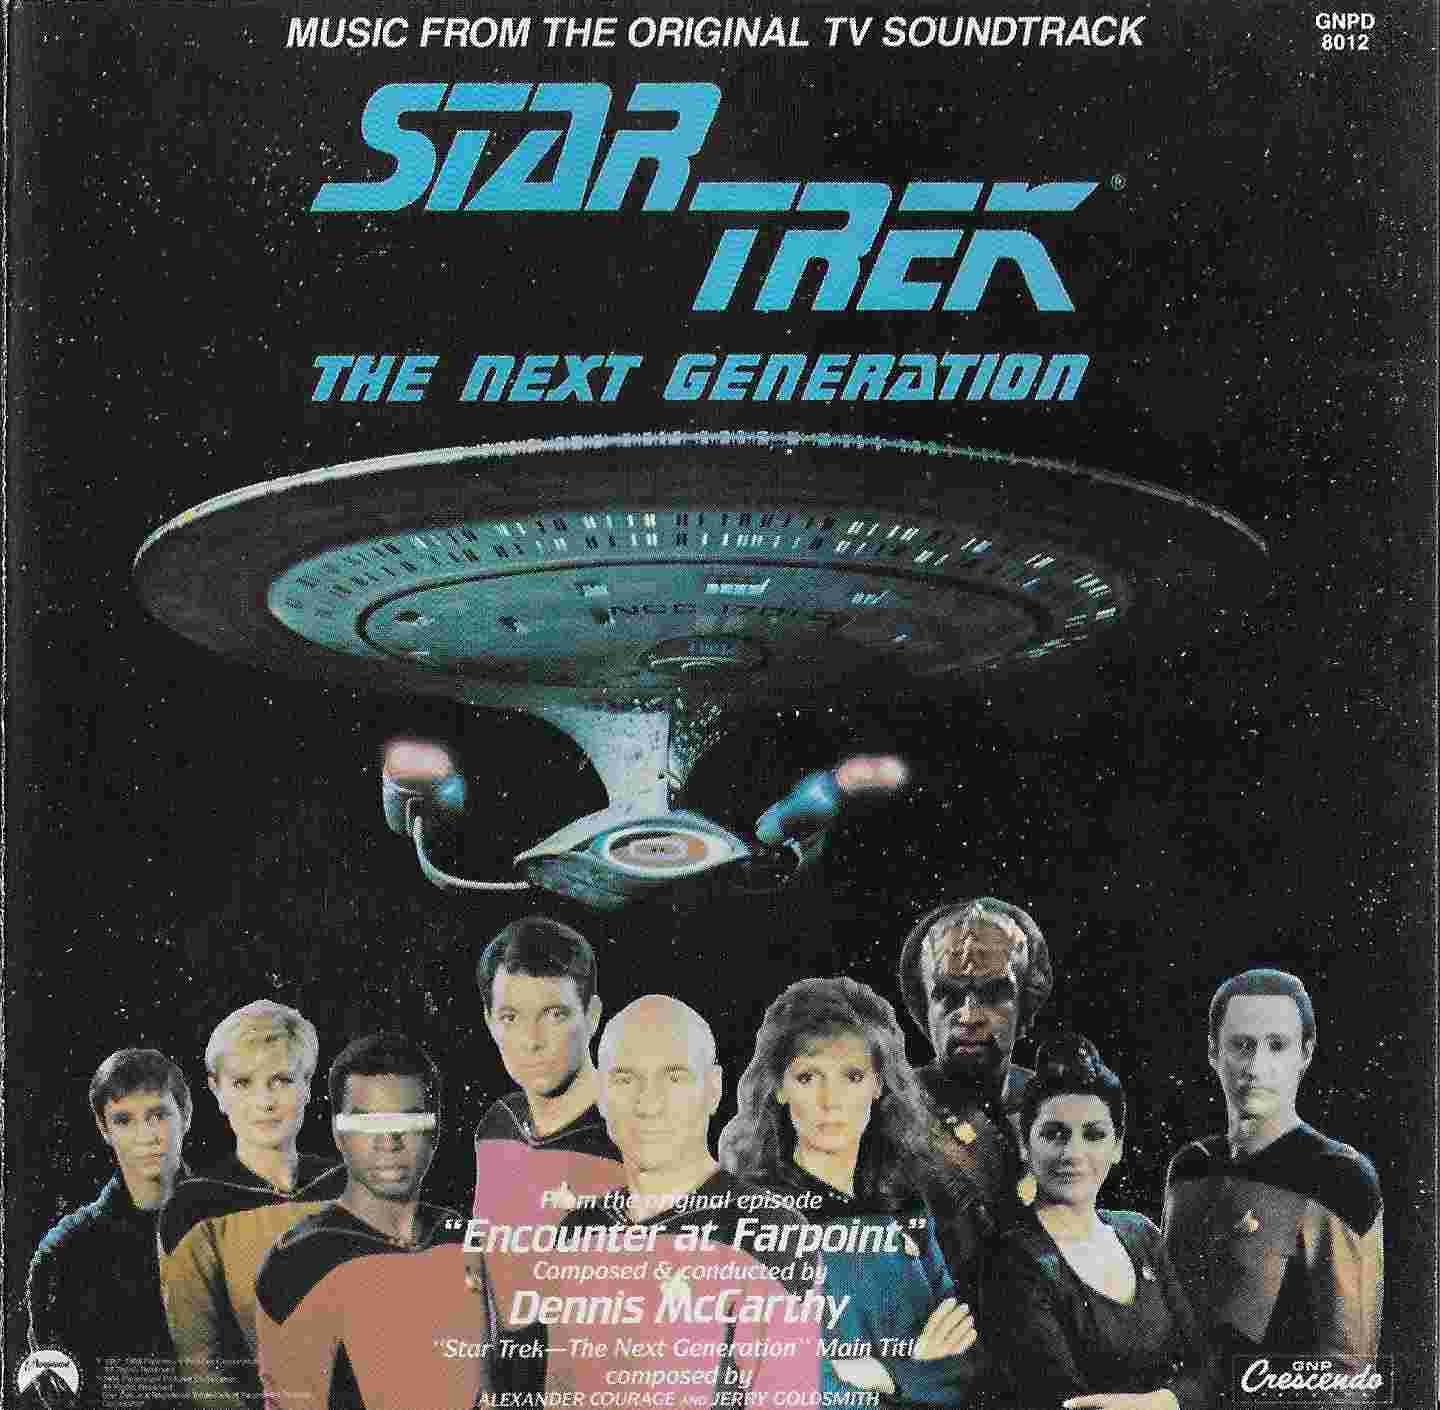 Picture of Star trek - The next generation by artist Dennis McCarthy from the BBC cds - Records and Tapes library